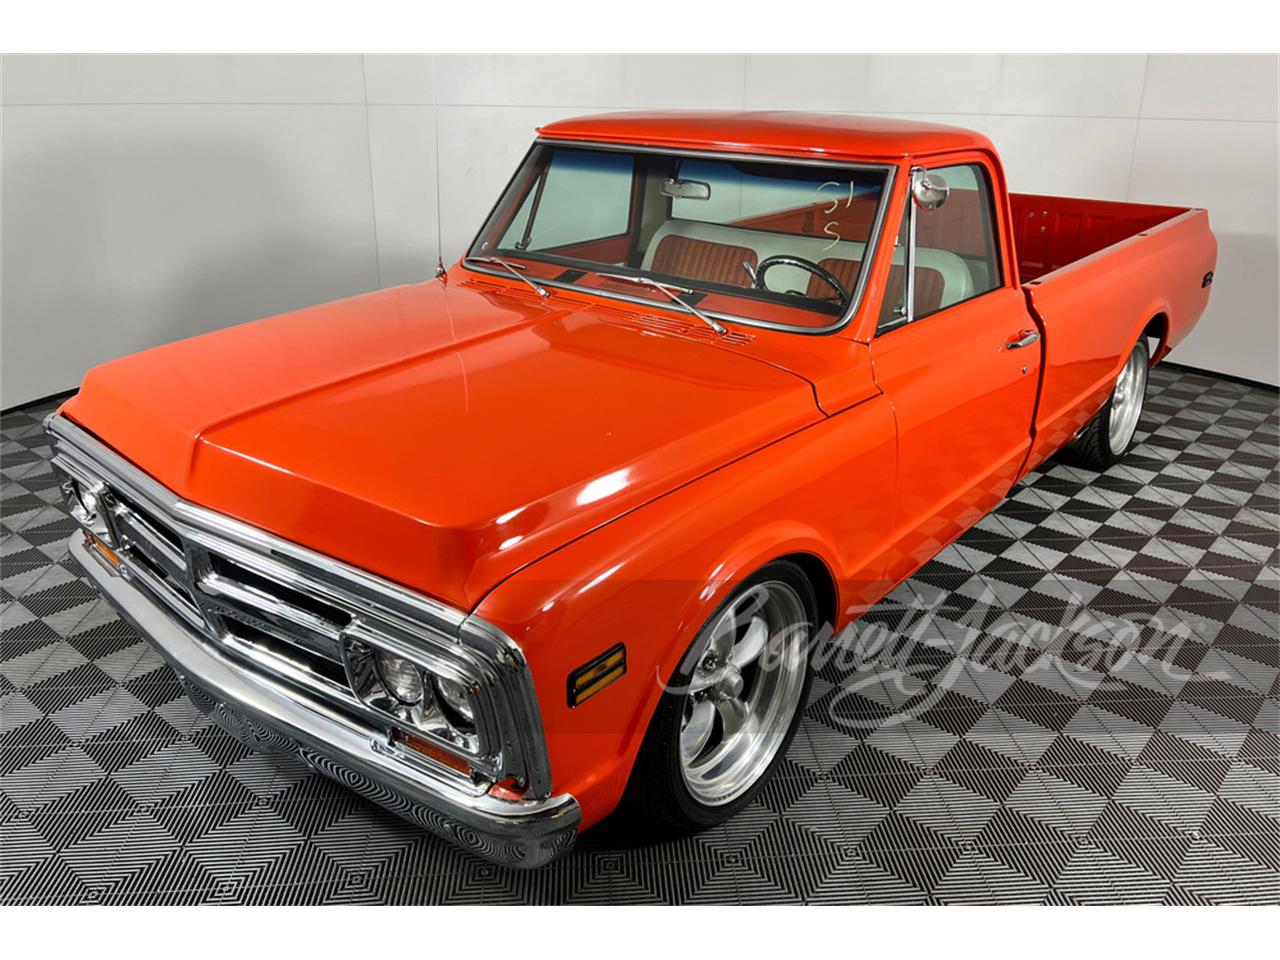 For Sale at Auction: 1969 GMC C/K 10 in Scottsdale, Arizona for sale in Scottsdale, AZ